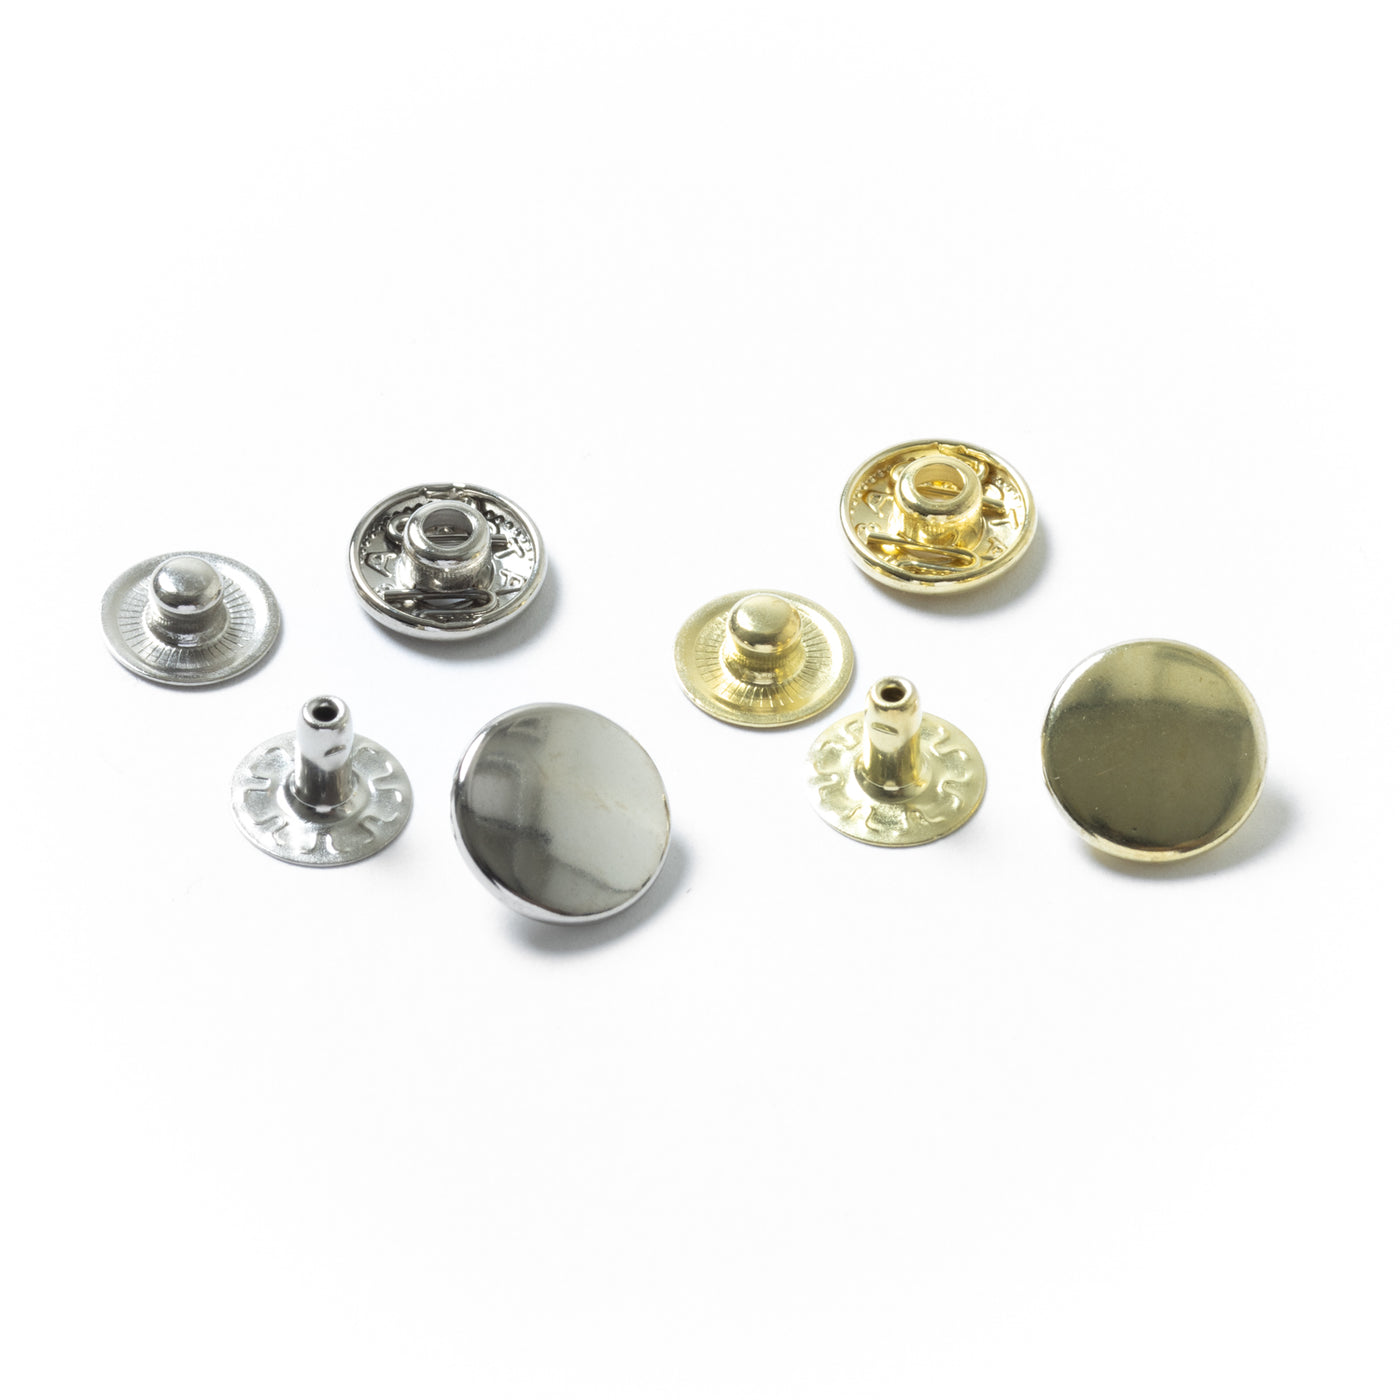 Snap fasteners (20 pieces)